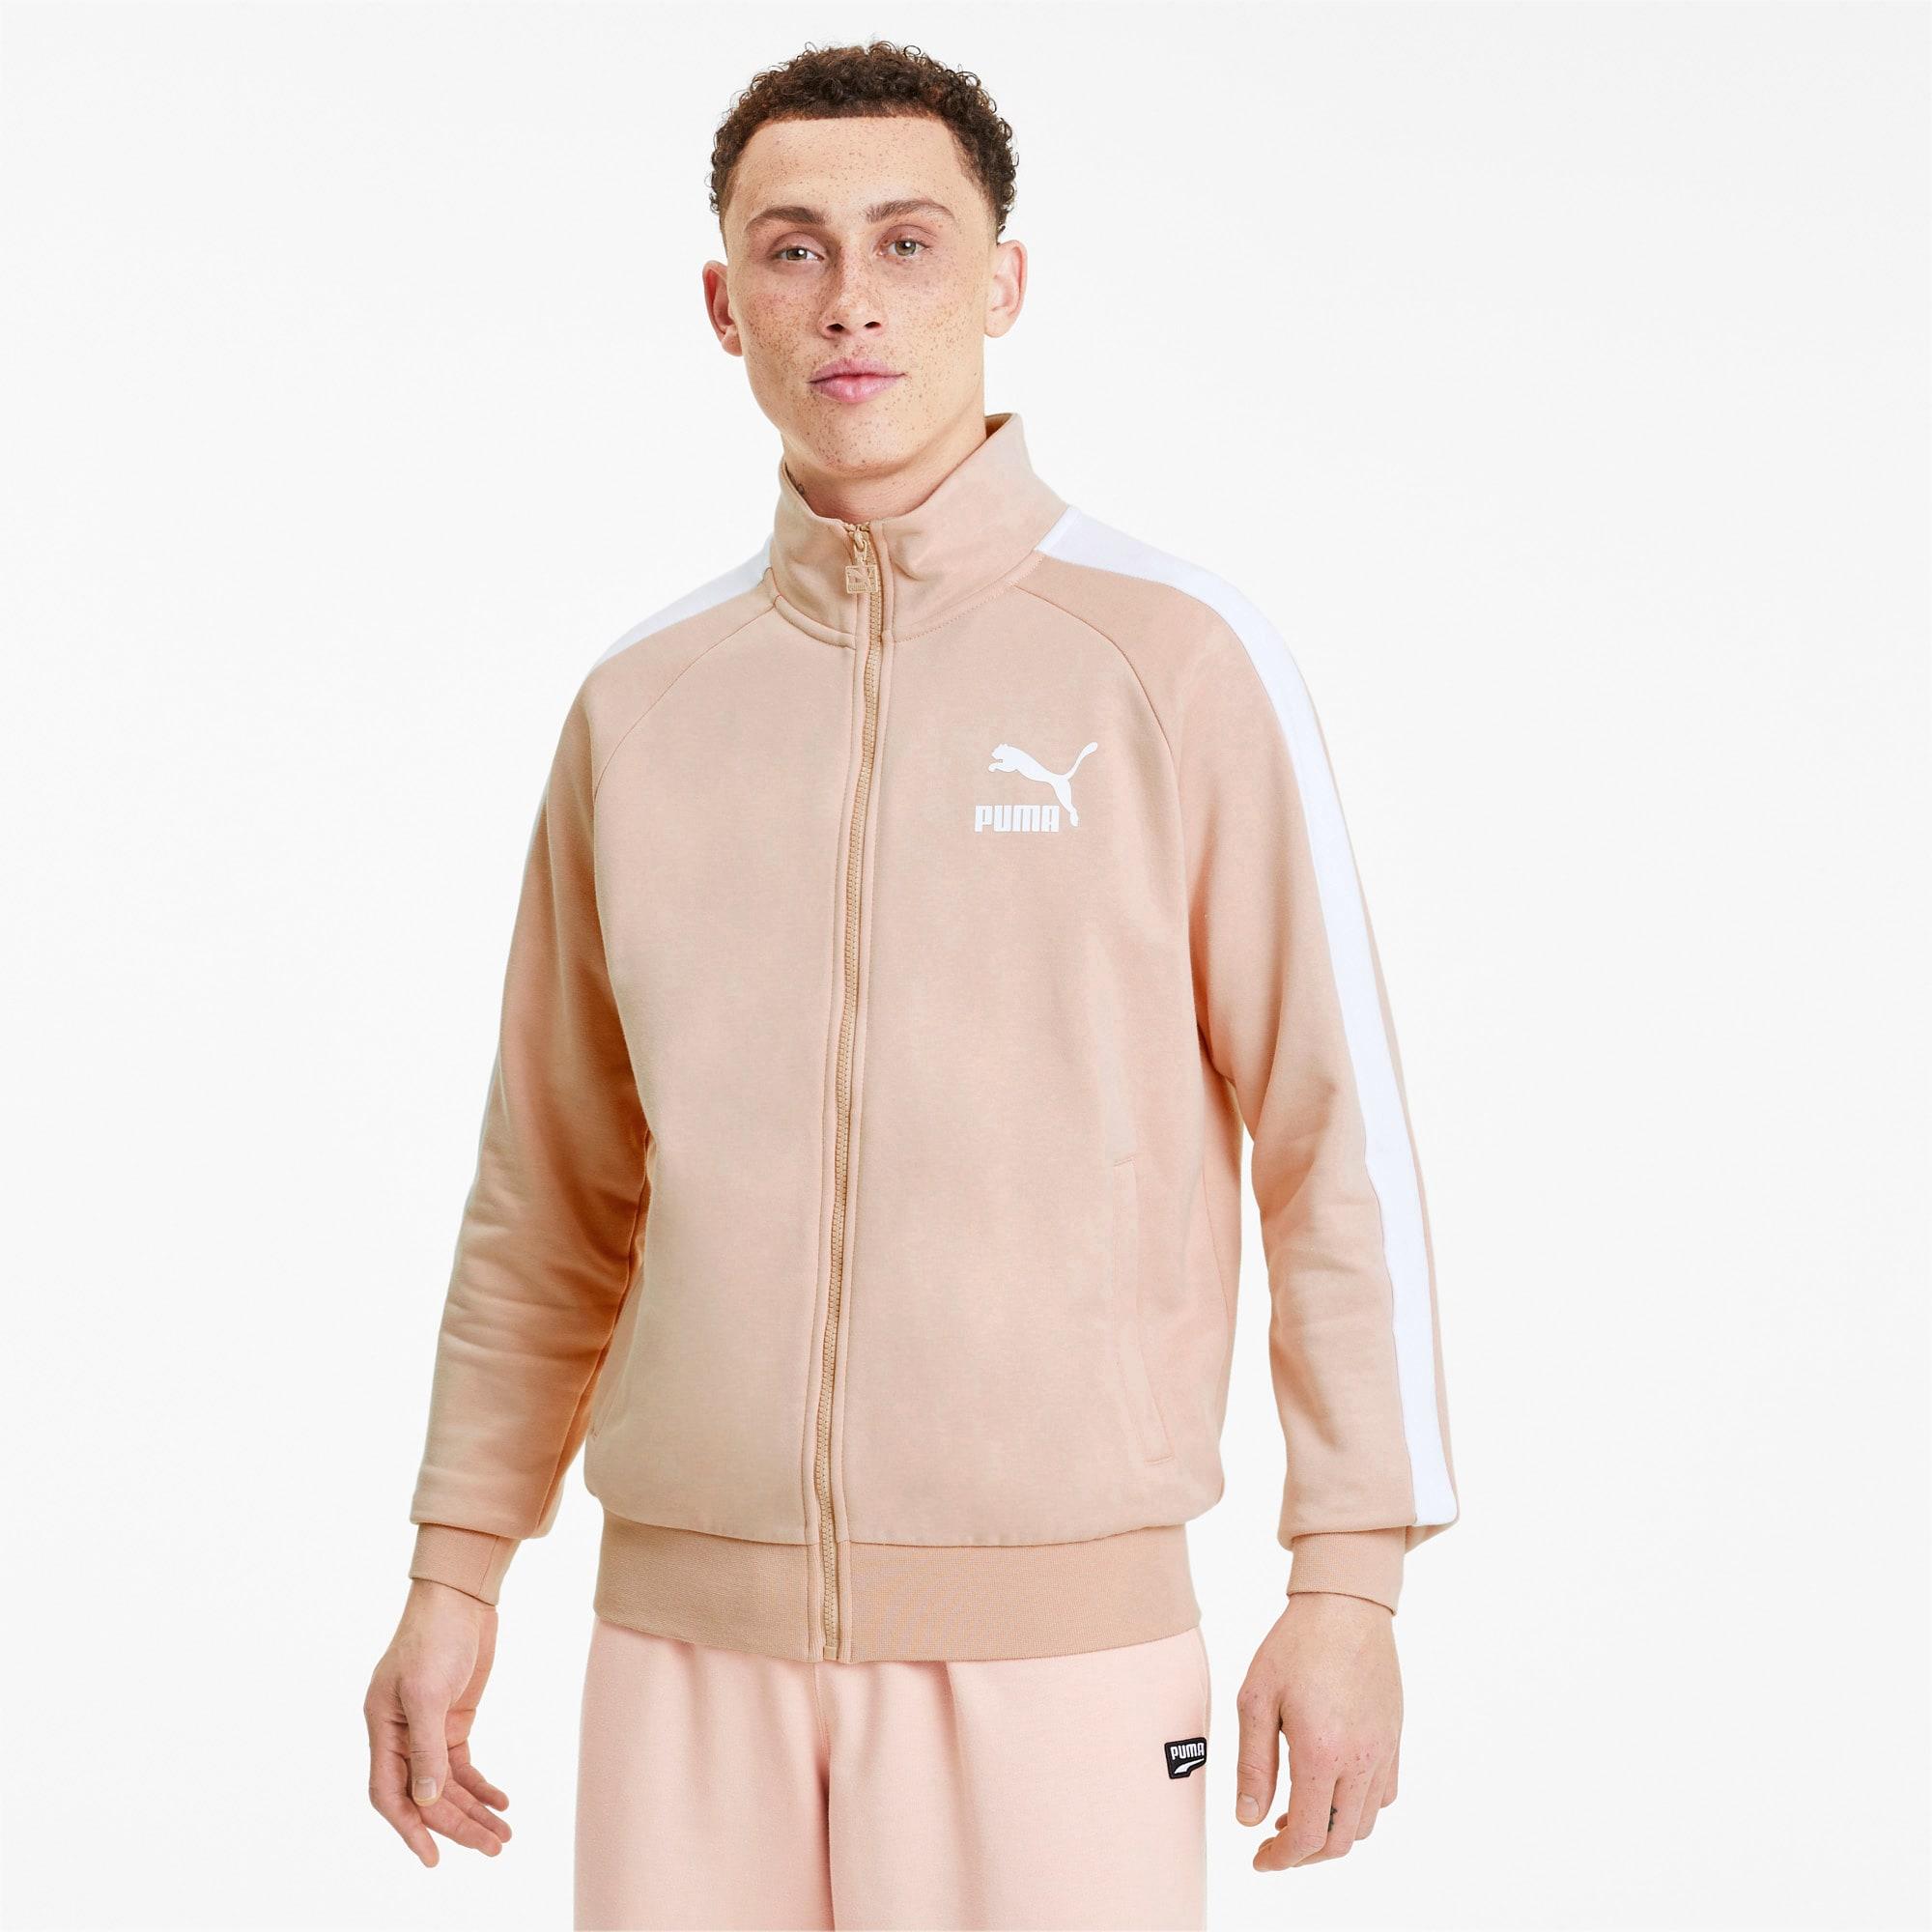 PUMA Cotton Iconic T7 Men's Track Jacket in Pink Sand (Pink) for Men - Lyst